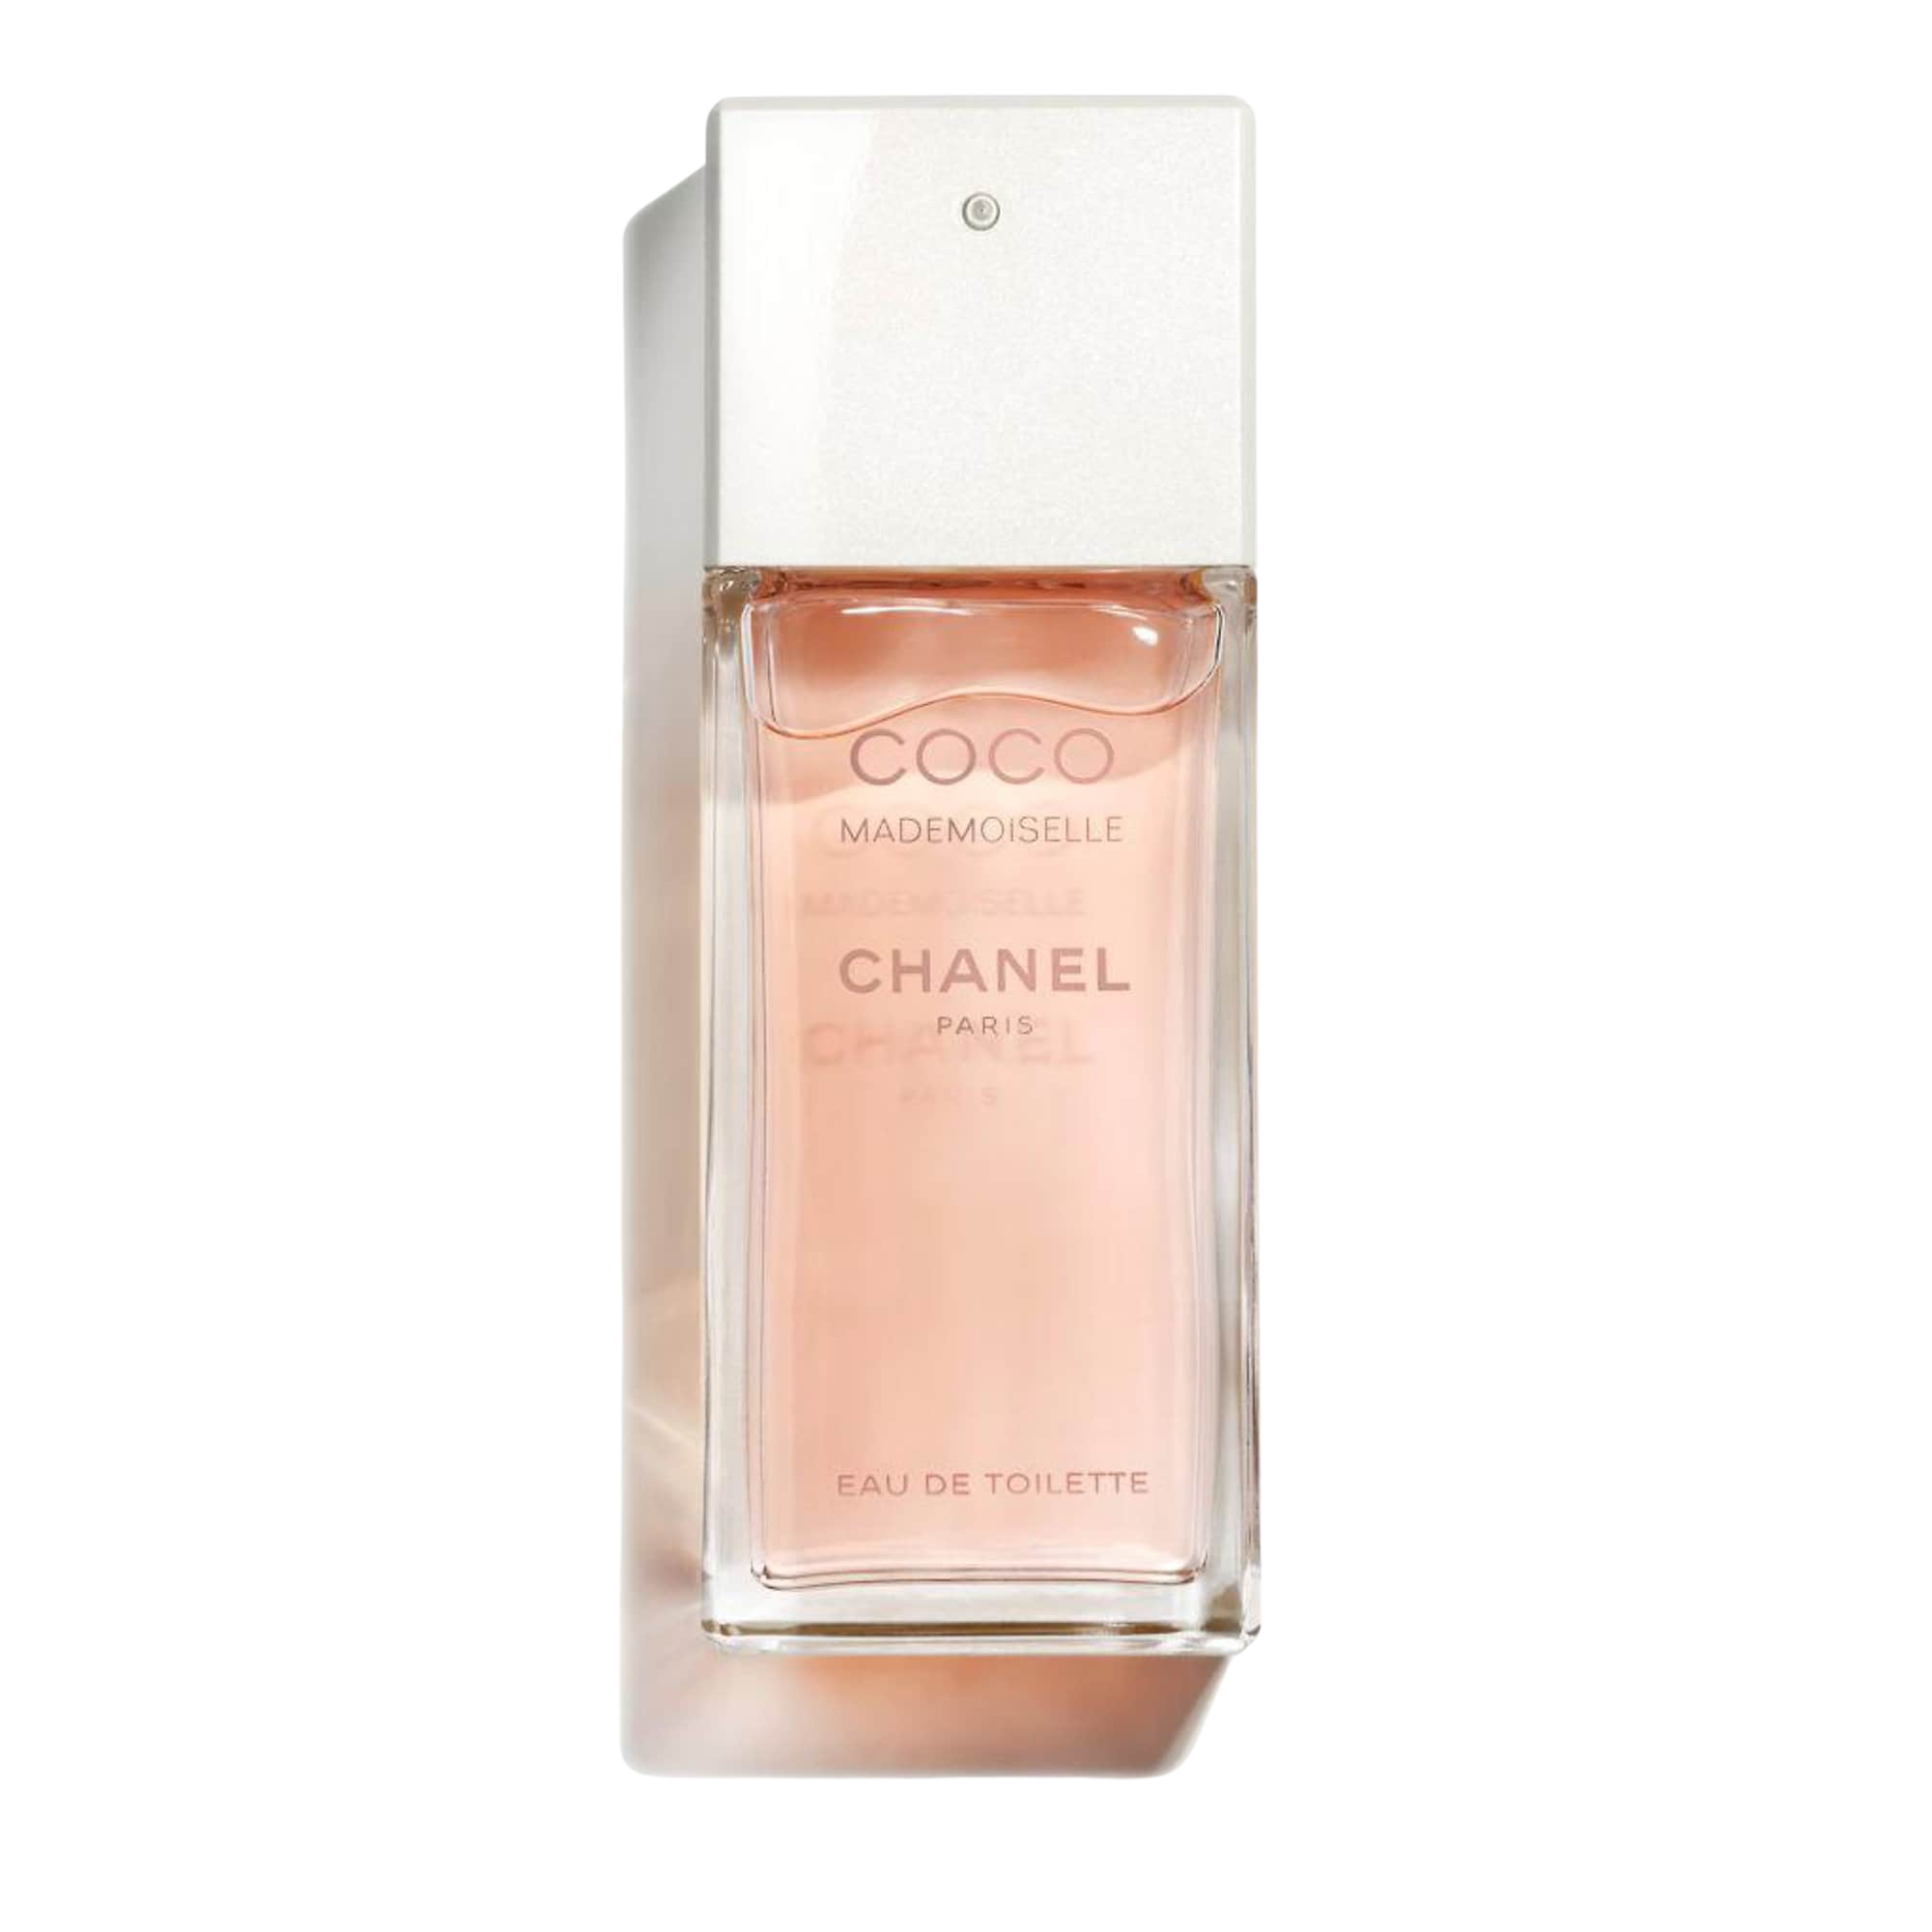 rose gold mademoiselle coco chanel